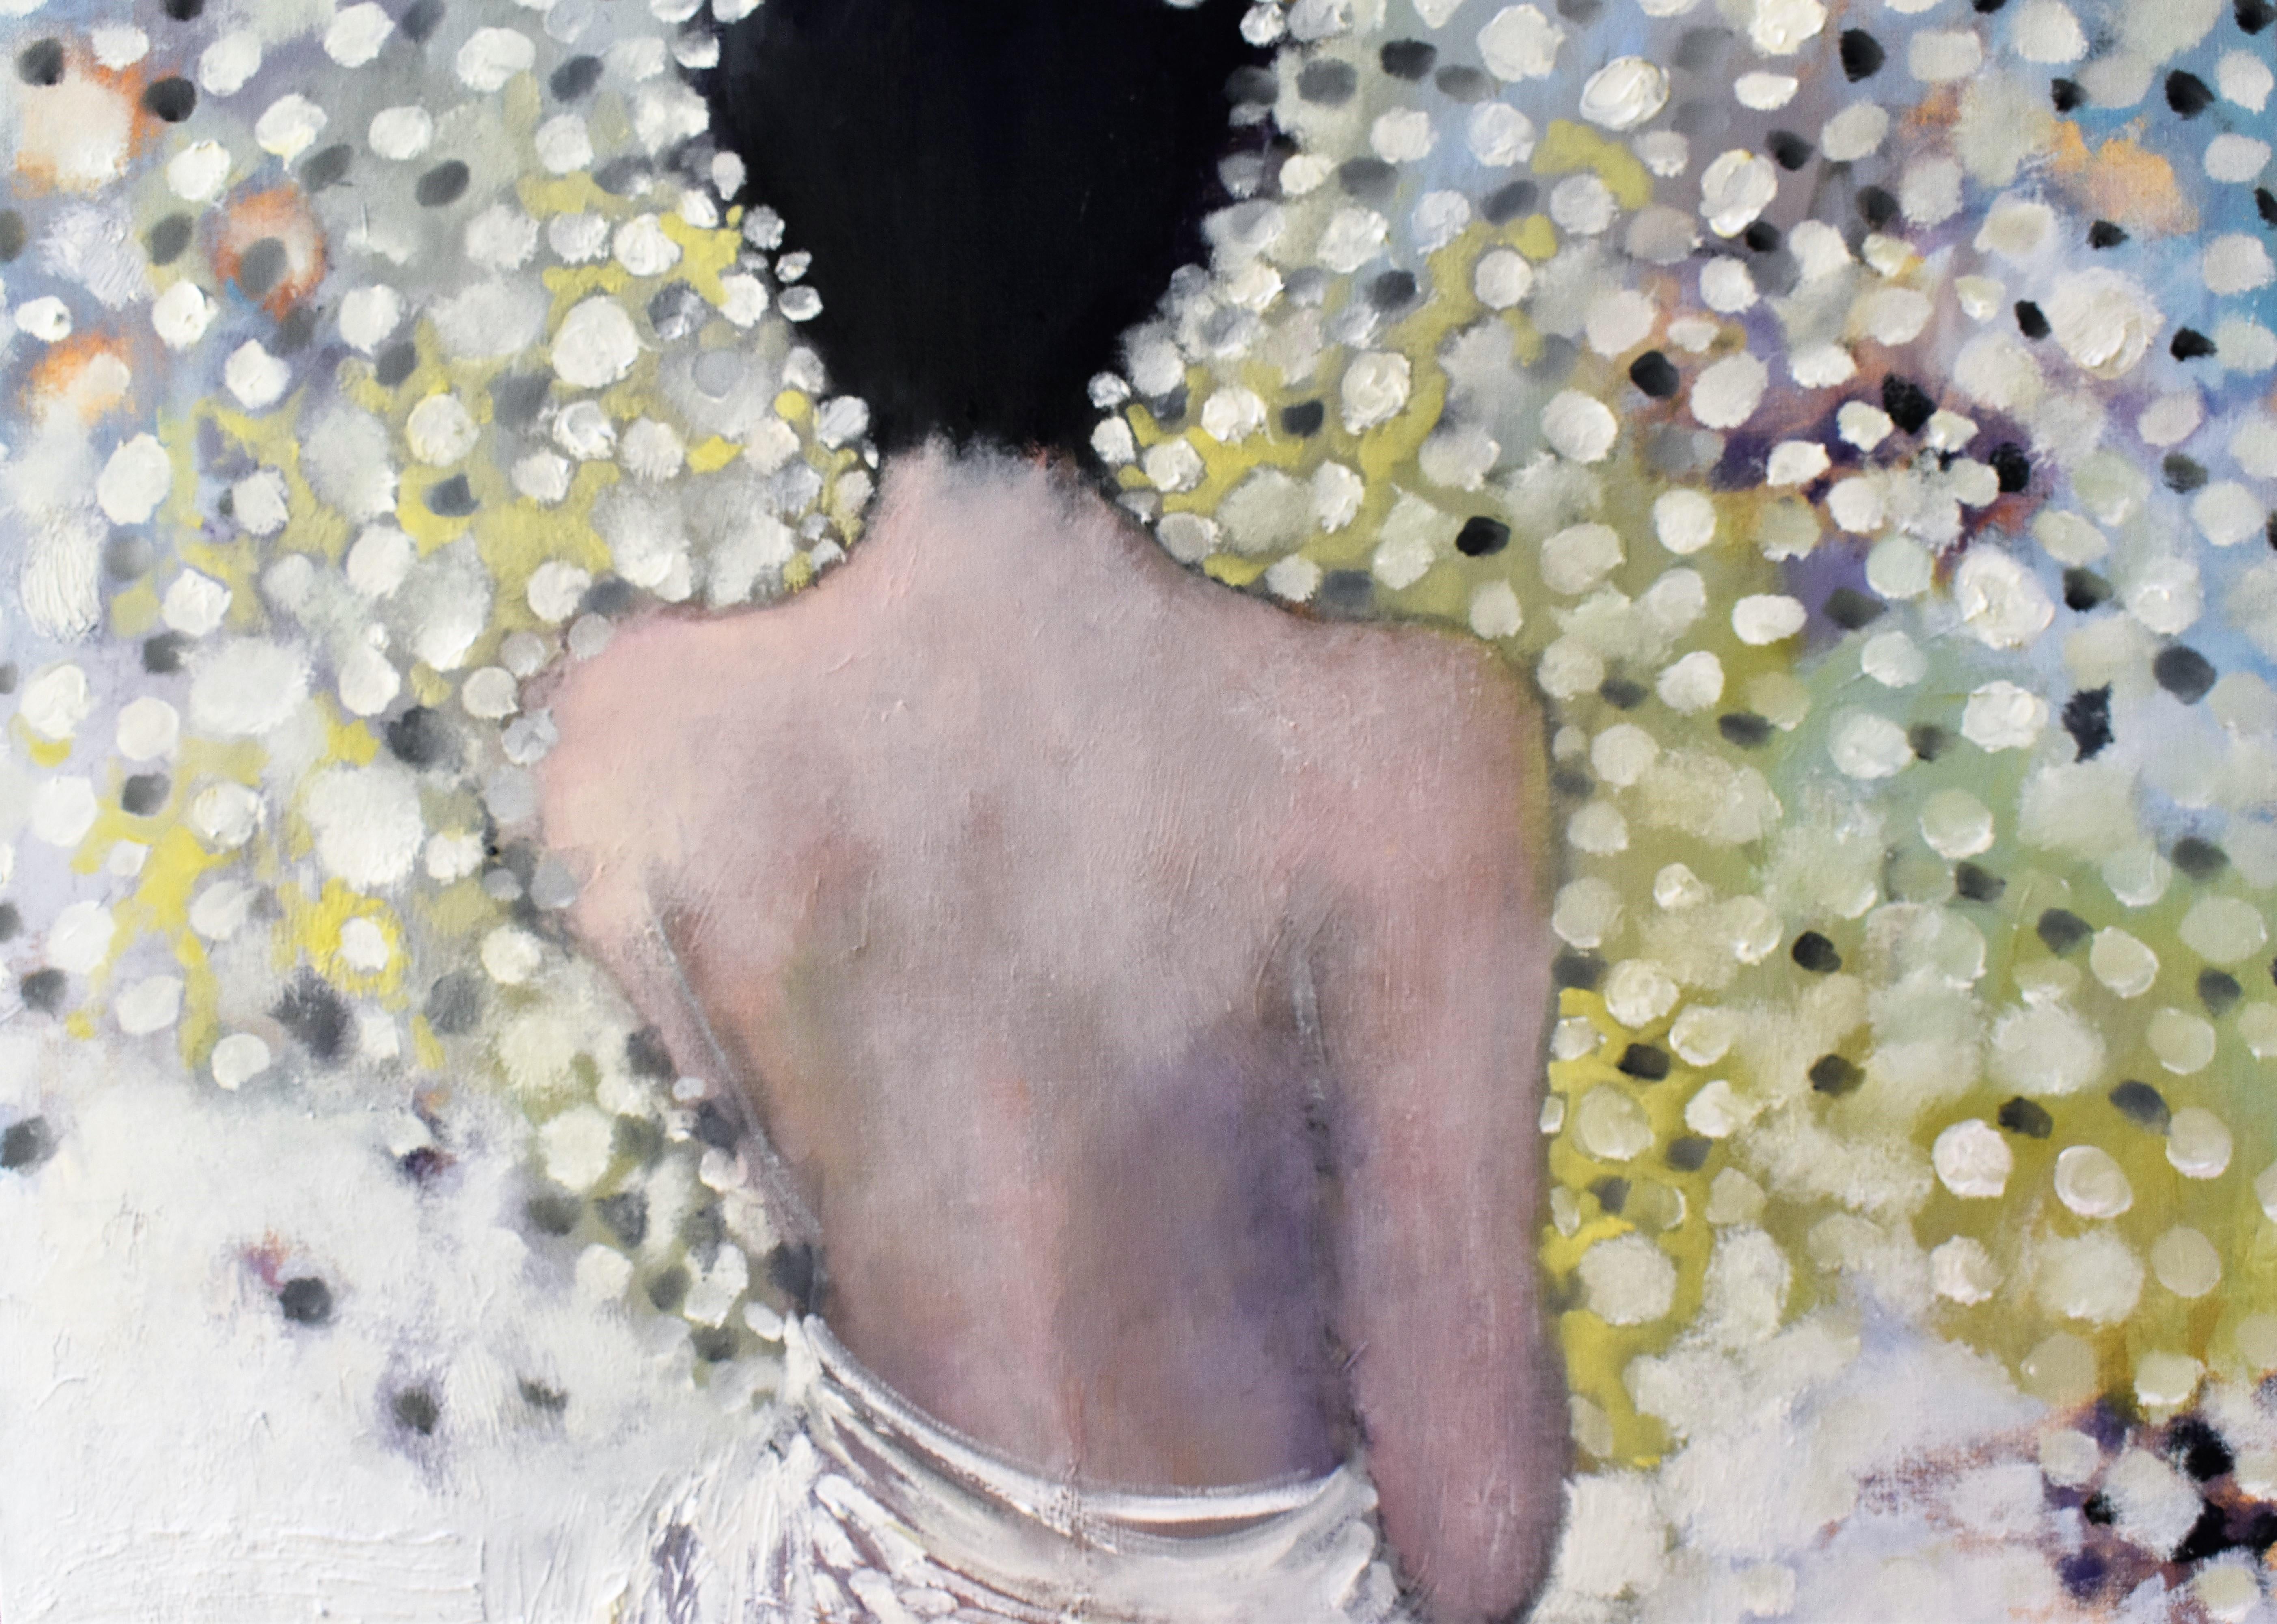 <p>Artist Comments<br>Artist Mary Pratt paints an ethereal figure with a billowing gossamer white skirt. The woman gazes through a sea of floating lights, framing her and spilling around her gentle stance. Mary paints intuitively, evoking emotions